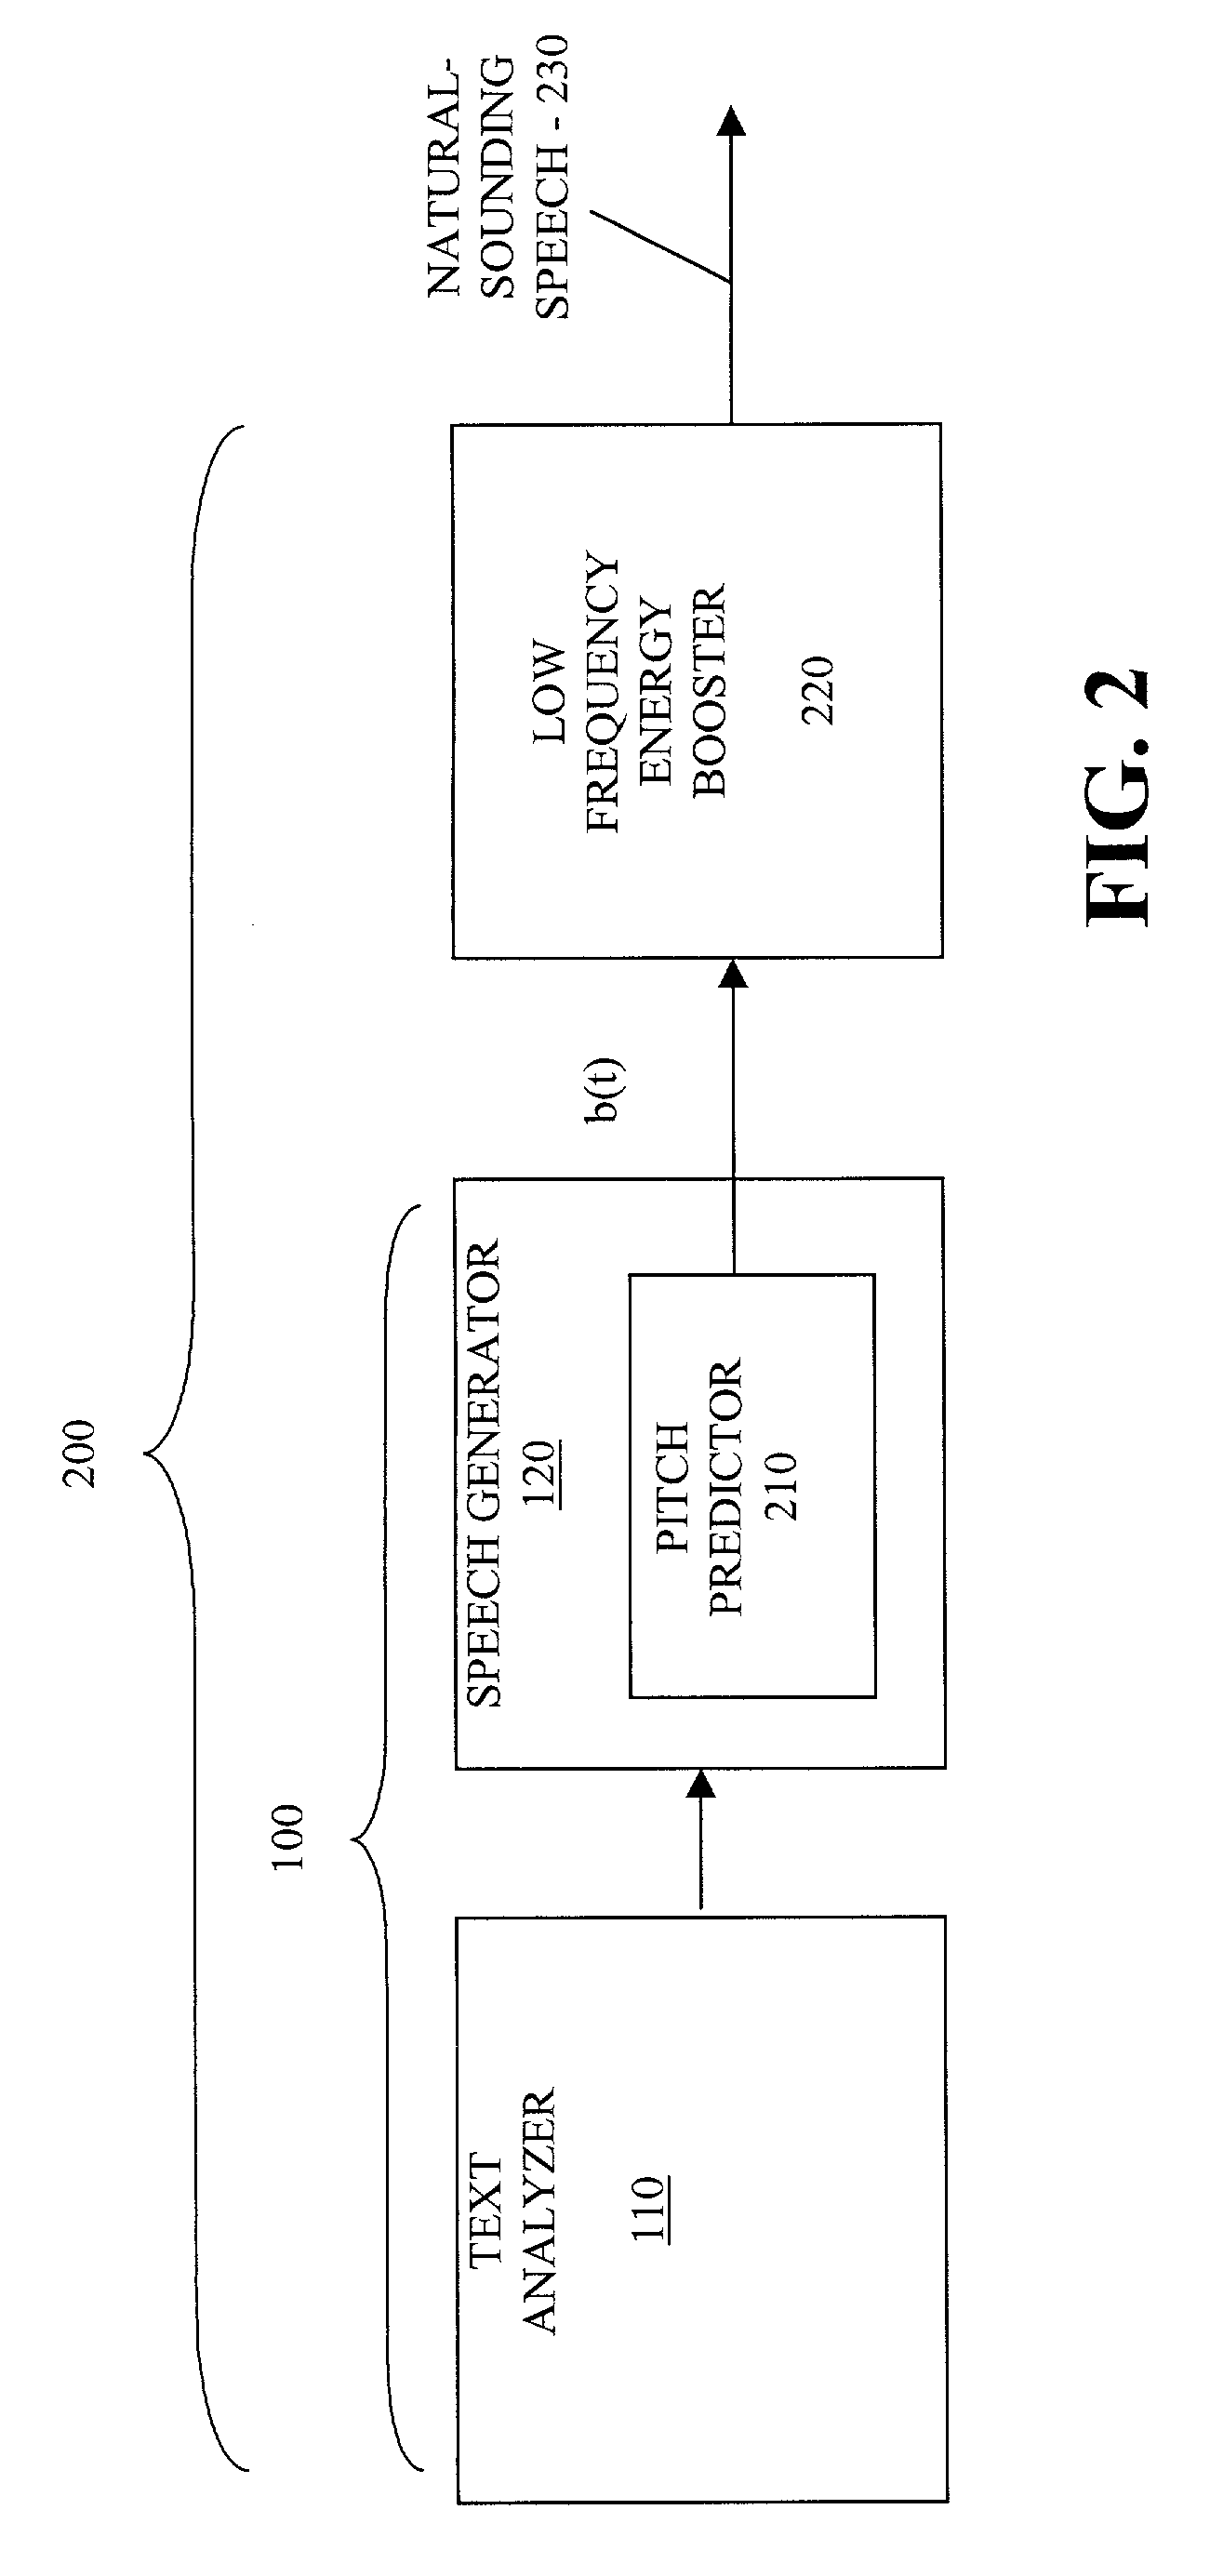 Method and apparatus for producing natural sounding pitch contours in a speech synthesizer